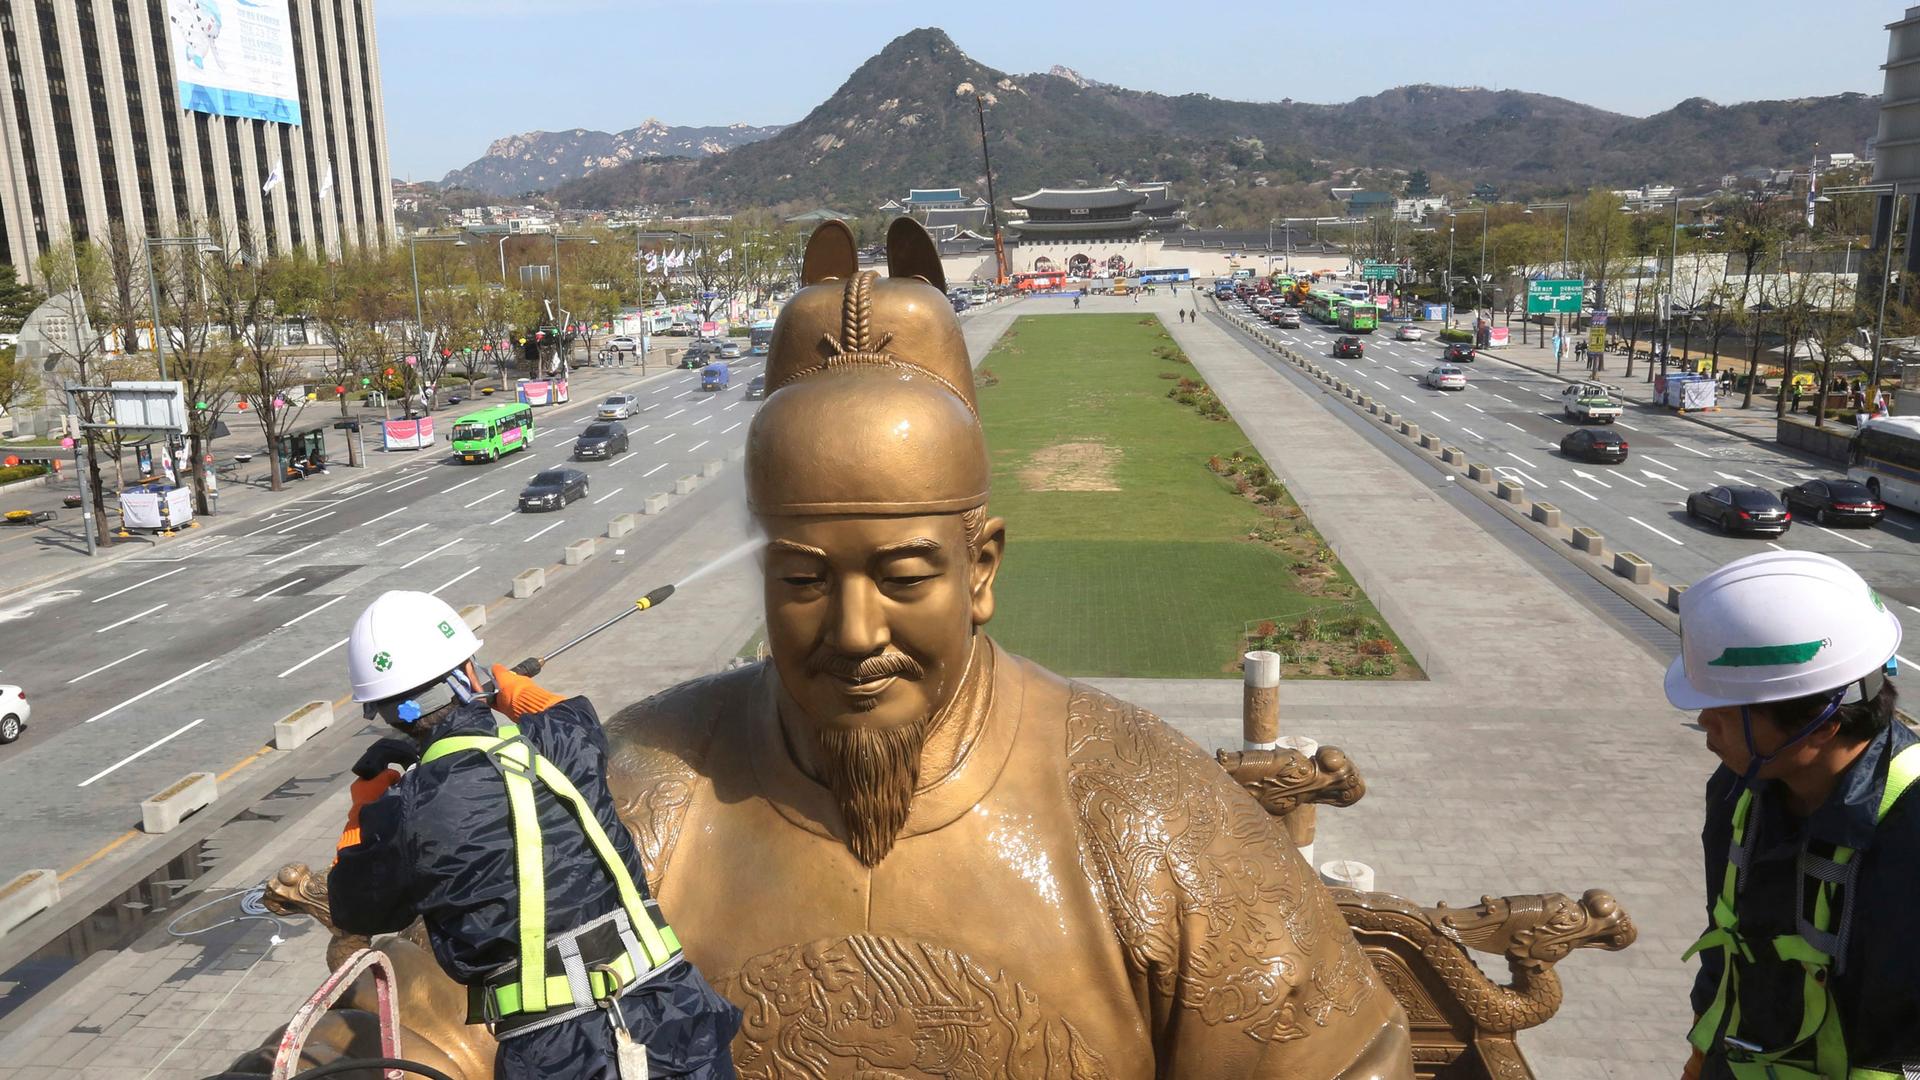 A worker gives a spring cleaning to the large gold-colored statue of King Sejong with mountains shown in the distance.